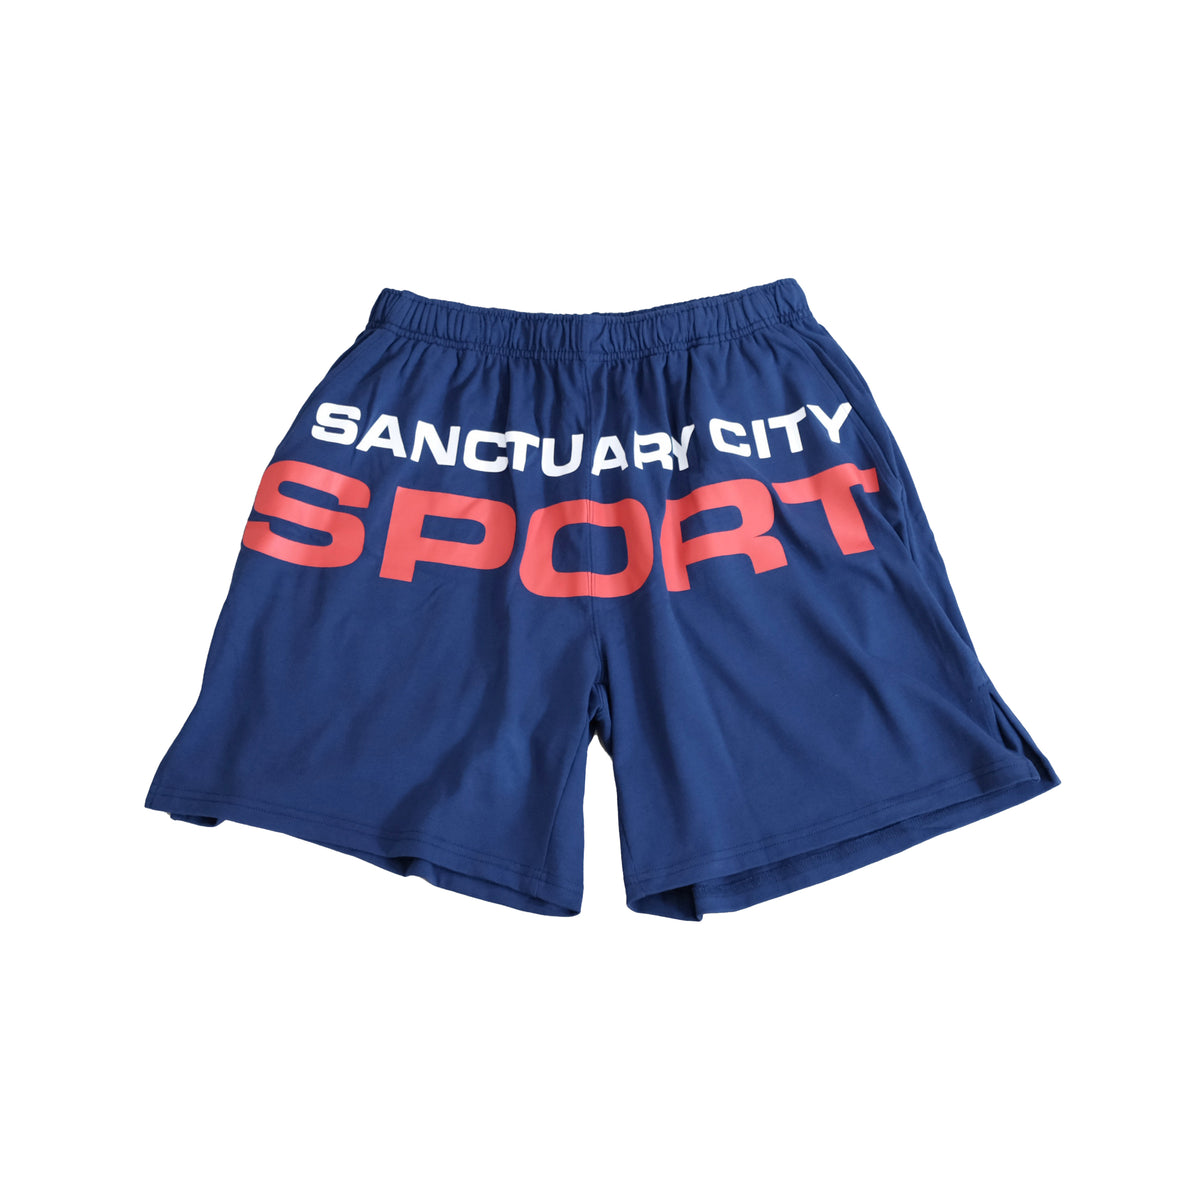 Last One WILLY CHAVARRIA / DIRTY WHITE BOY SHORTS BLUE